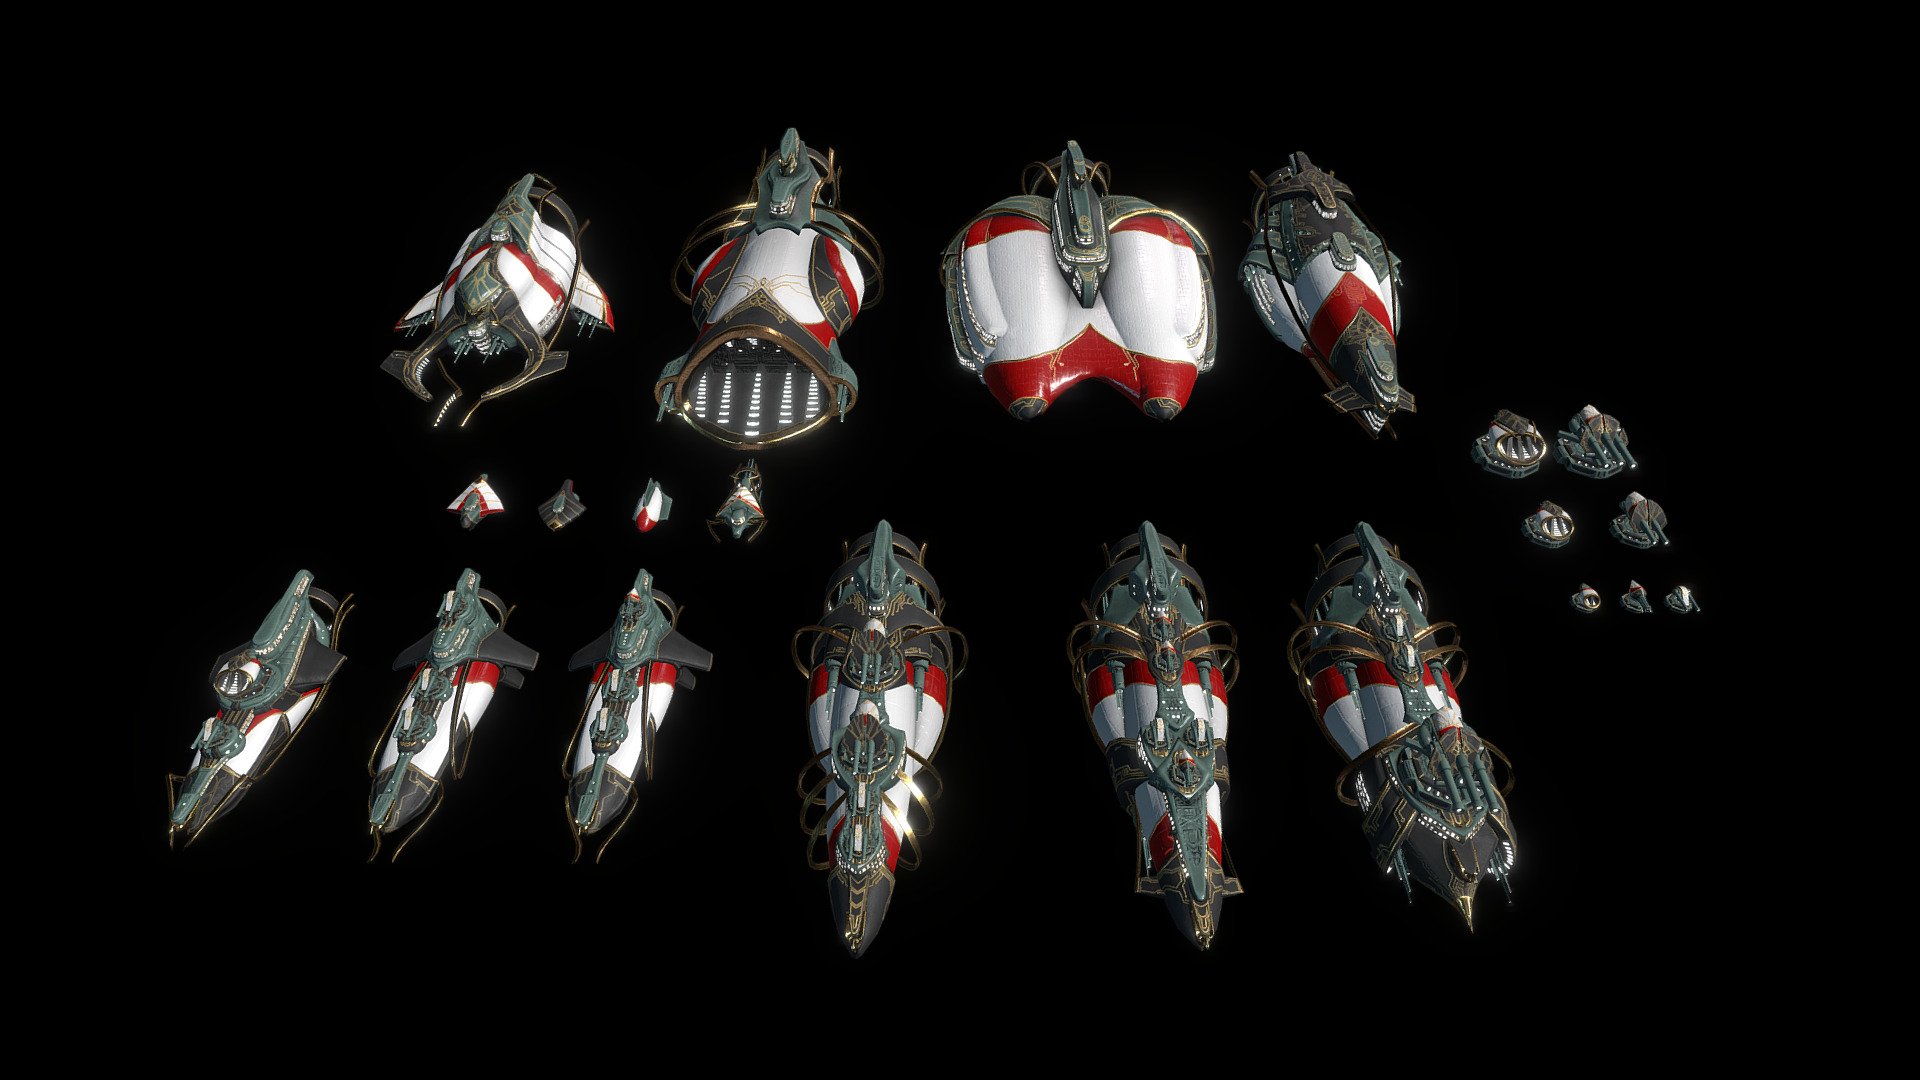 First batch of 3D models for an upcoming Stellaris ship set mod

Science Vessel, Construction Ship, Colony Ship, Transport Ship
Fighter, Bomber, Drop-pod, Construction Drone, Turrets
Corvettes (Missile, Interceptor, Picket), Destroyers (Gunship, Picket, Artillery+Interceptor)

Style based on my fantasy/steampunk airship designs 3d model